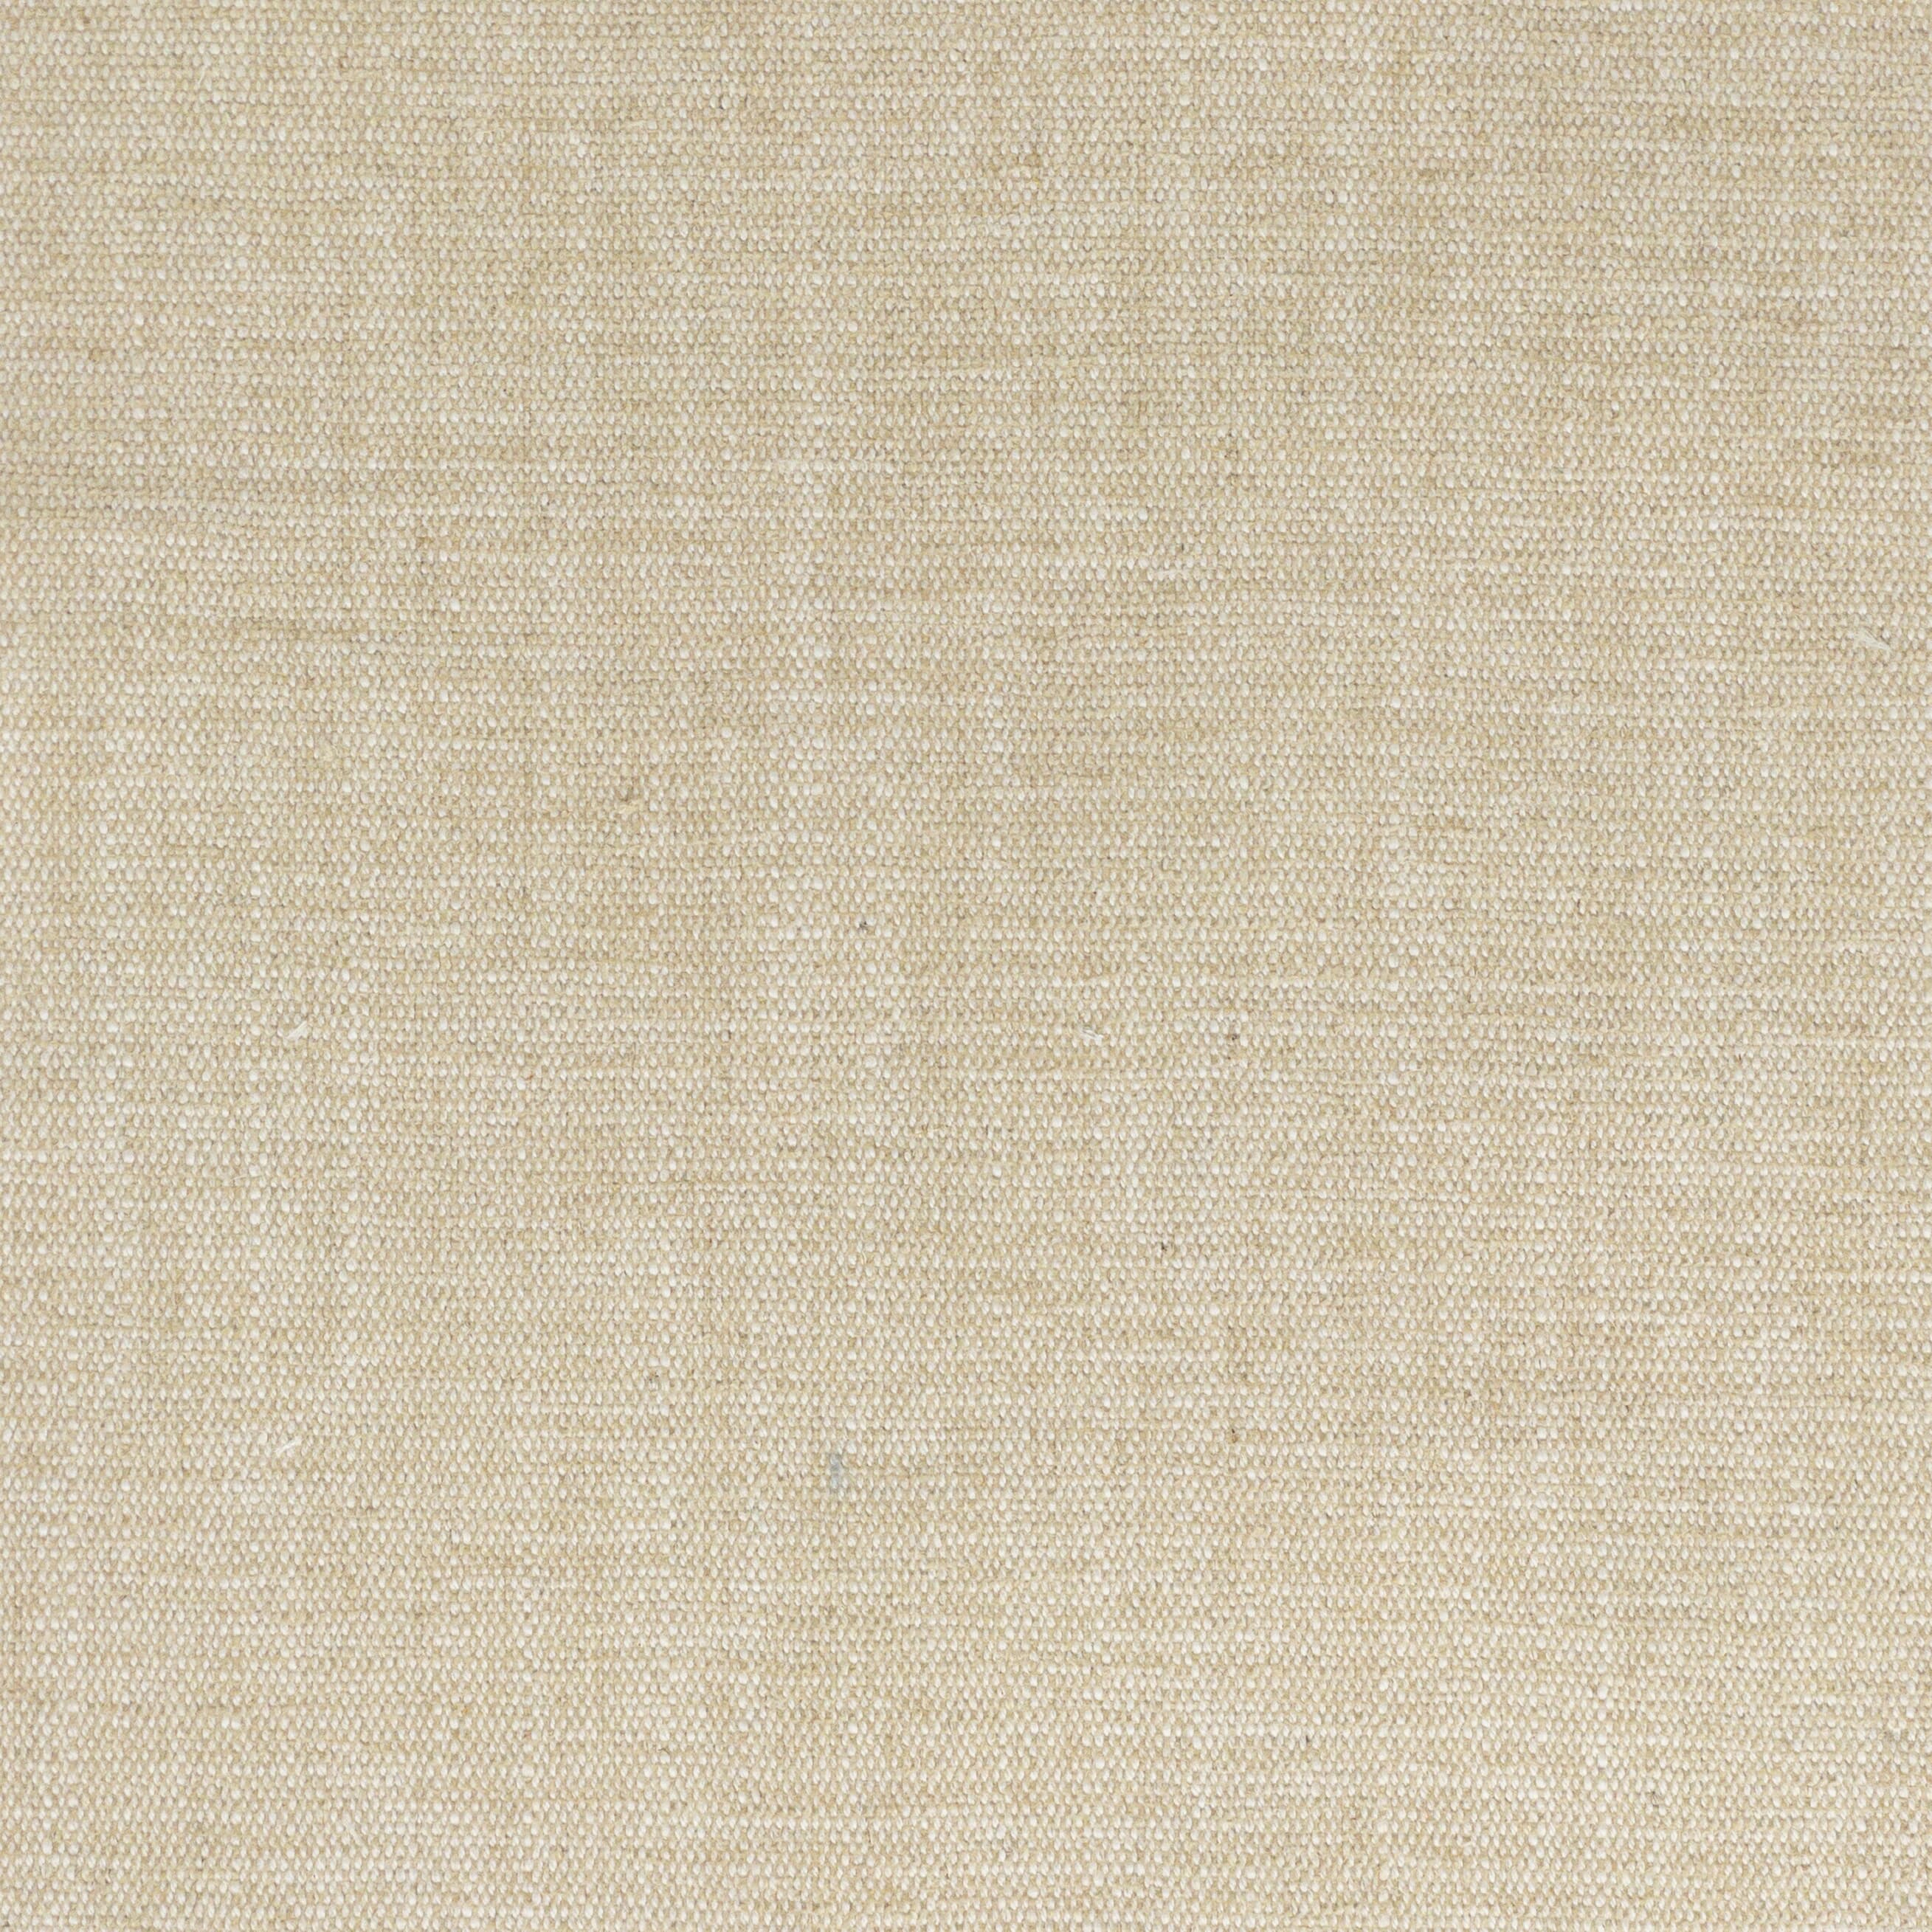 Judson 5 Beige by Stout Fabric